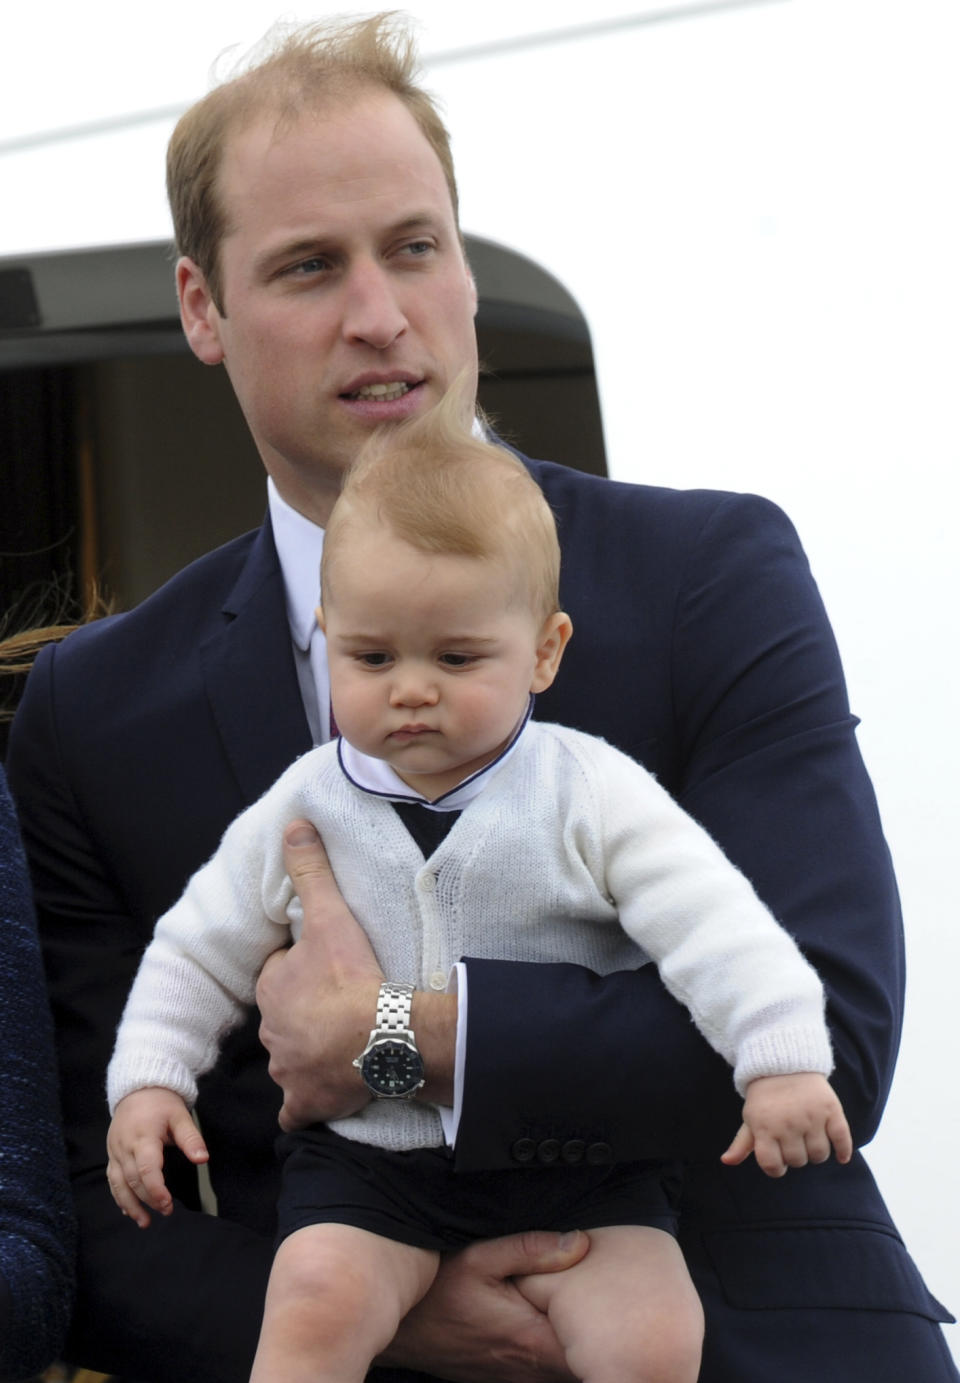 Britain's Prince William carries his son Prince George as they depart for Sydney, Australia, from Wellington, New Zealand, Wednesday, April 16, 2014. (AP Photo/SNPA, Ross Setford) NEW ZEALAND OUT